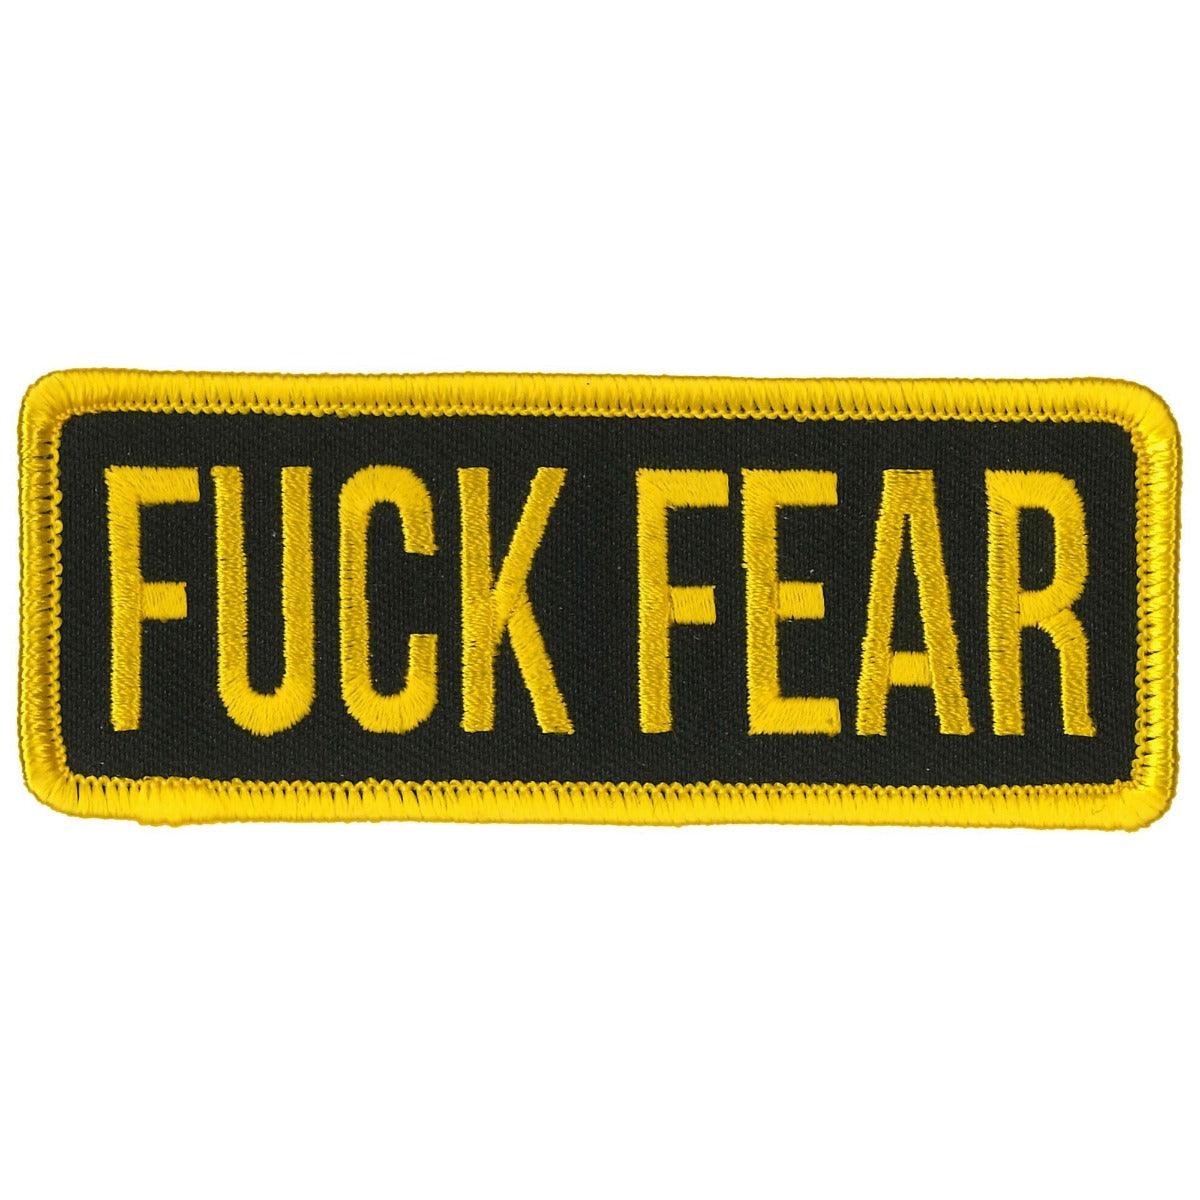 Hot Leathers Patch Fuck Fear - American Legend Rider